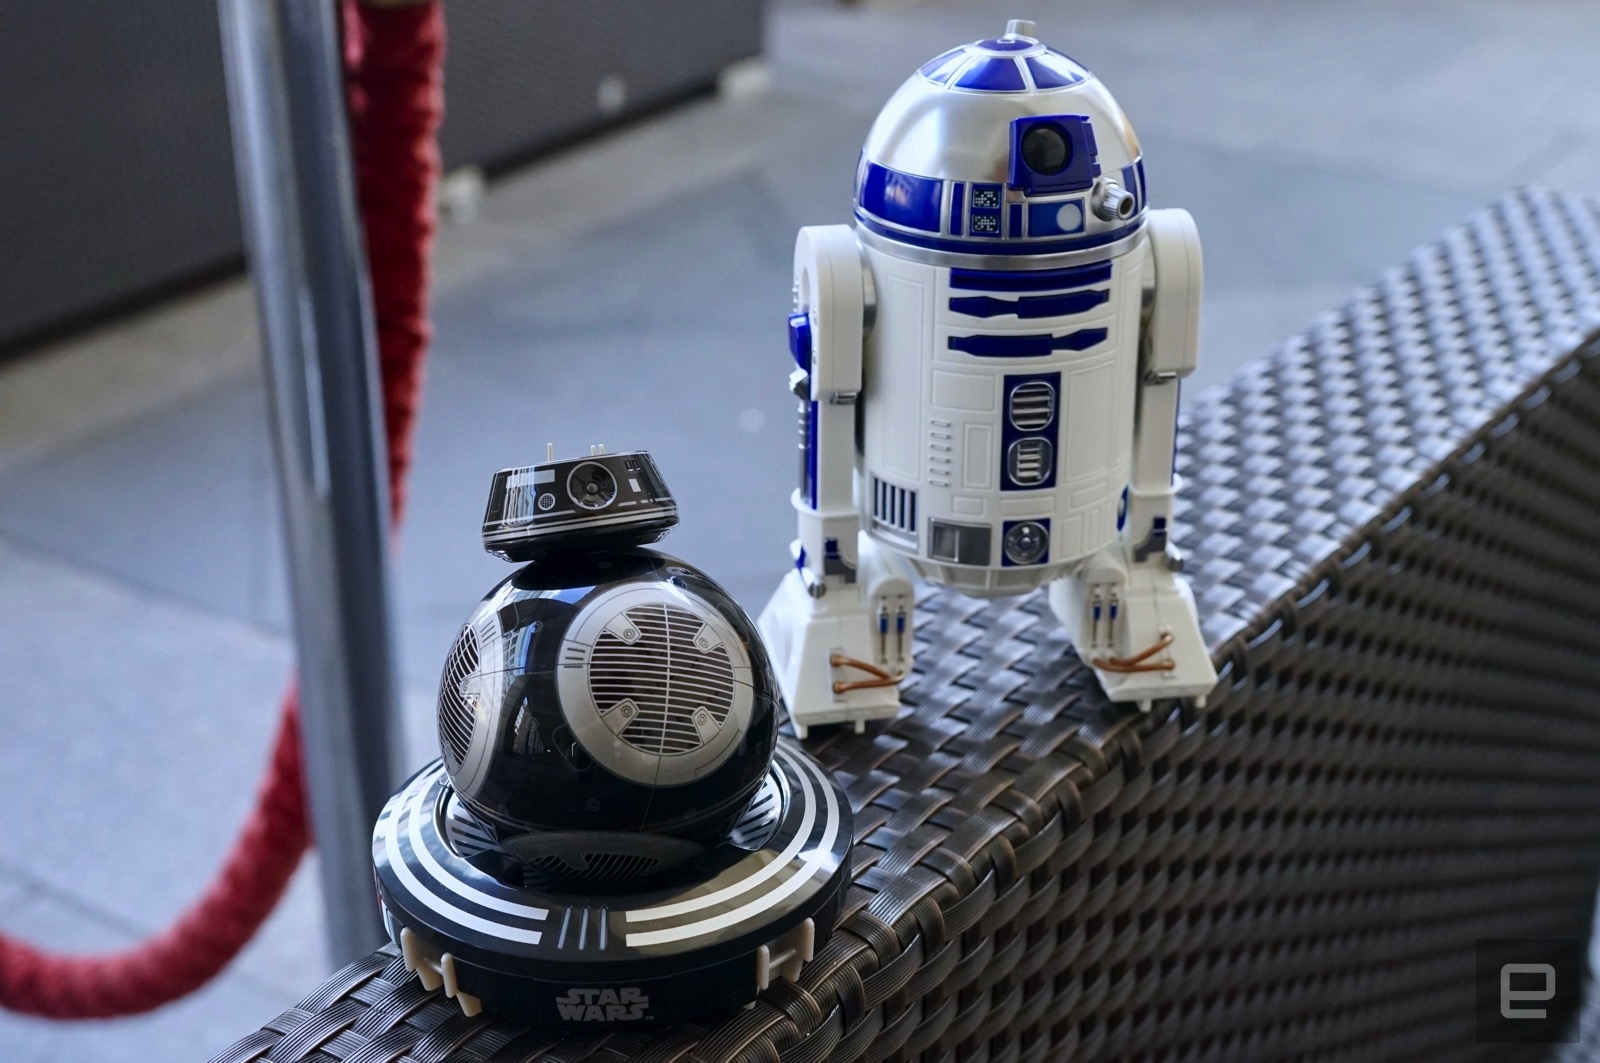 Meet R2-D2 and BB-9E, Sphero’s new ‘Star Wars’ toys | DeviceDaily.com